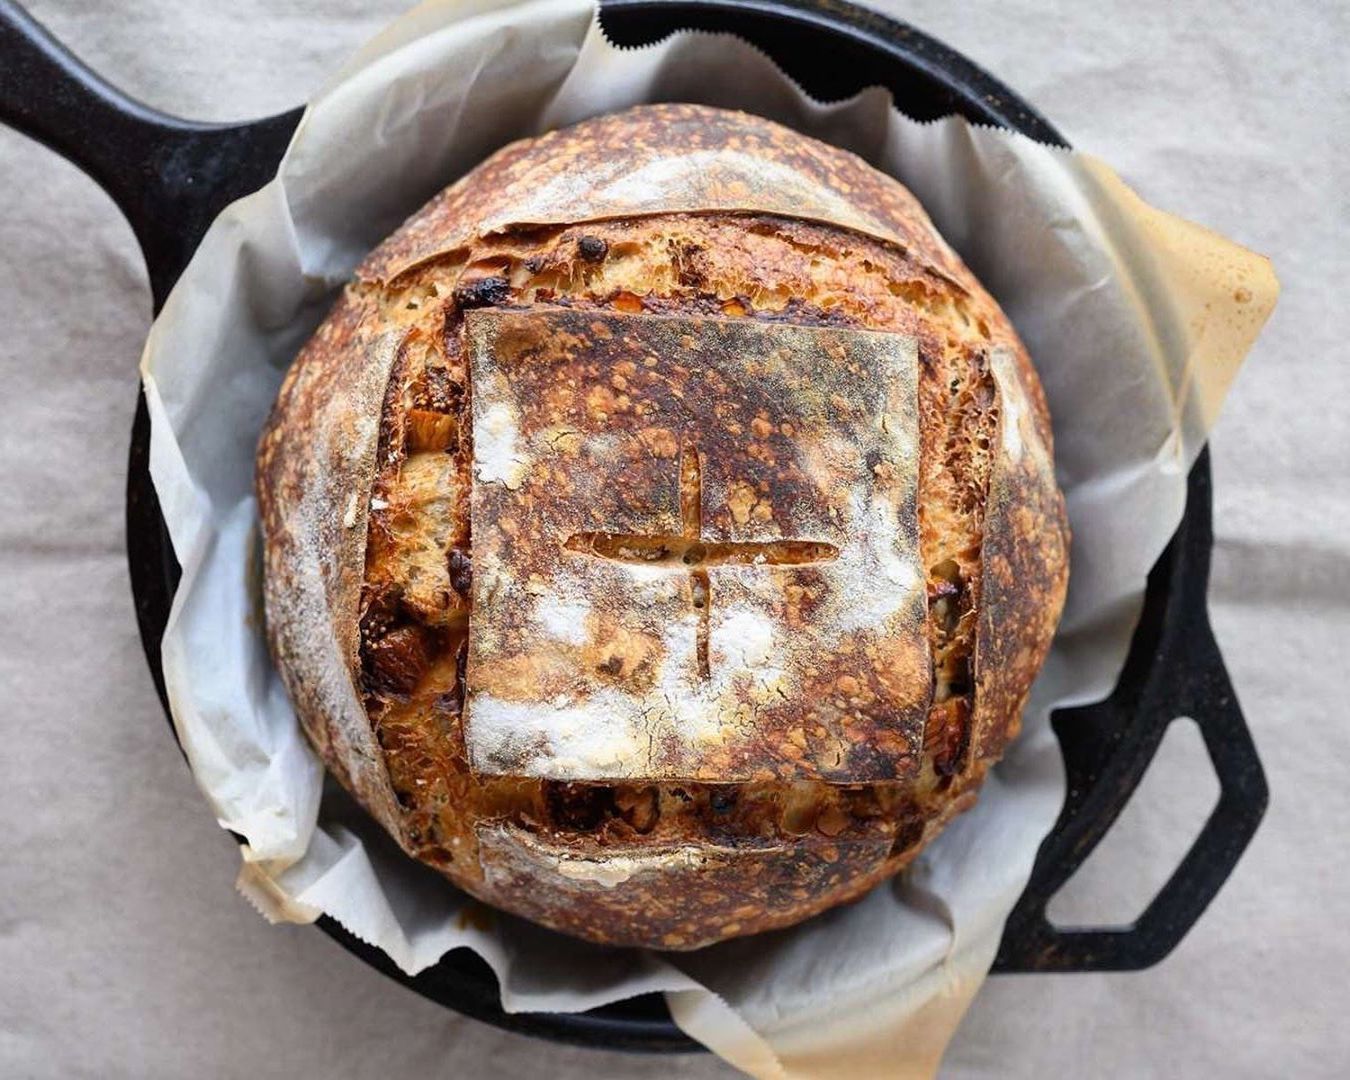 10 Things You Need to Bake Bread - Make the Best Bread at Home